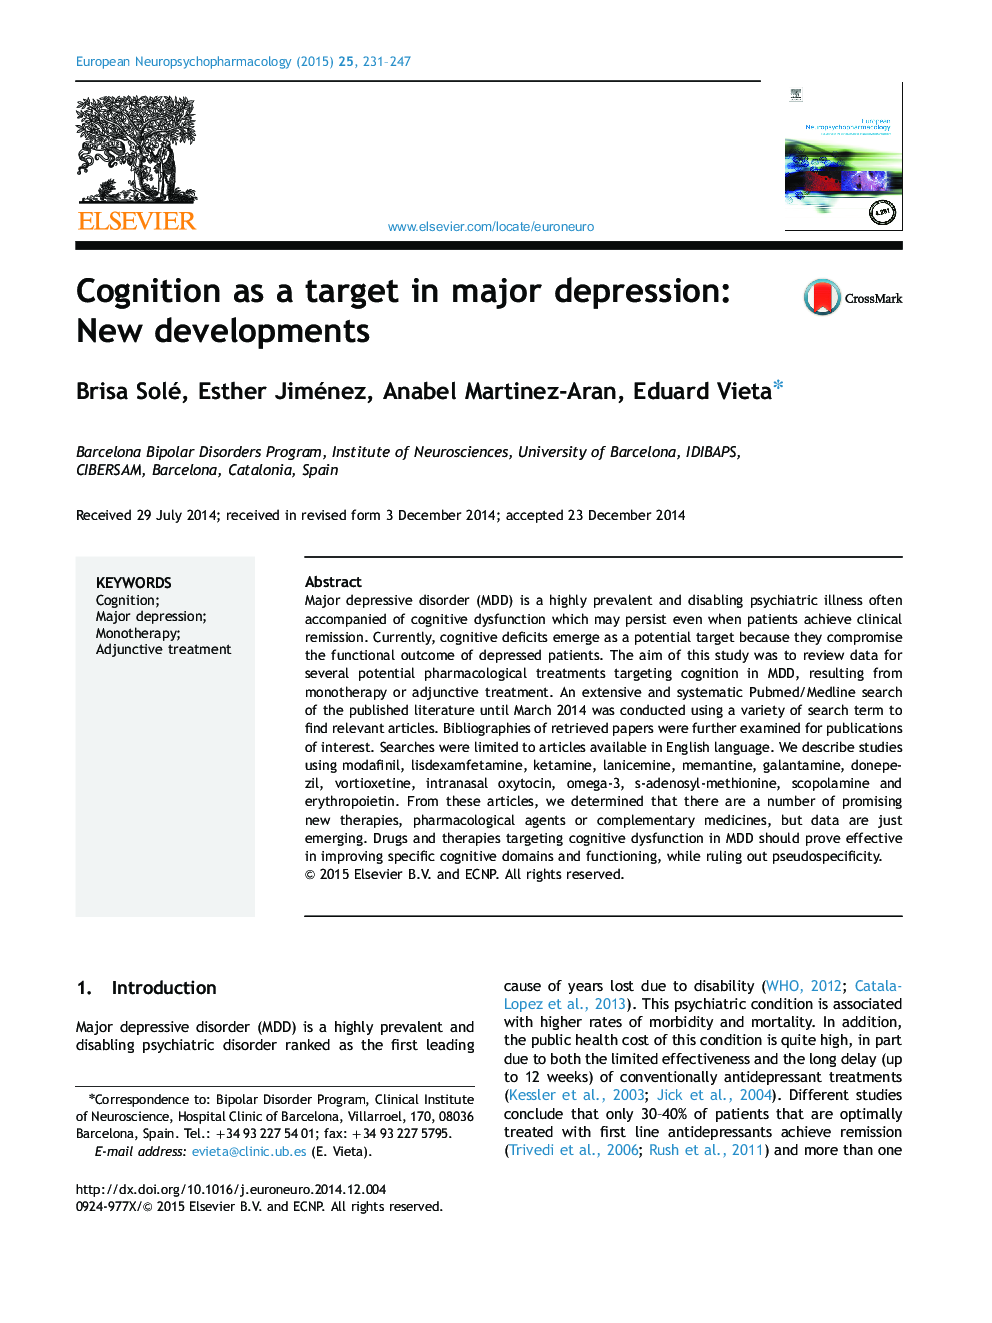 Cognition as a target in major depression: New developments